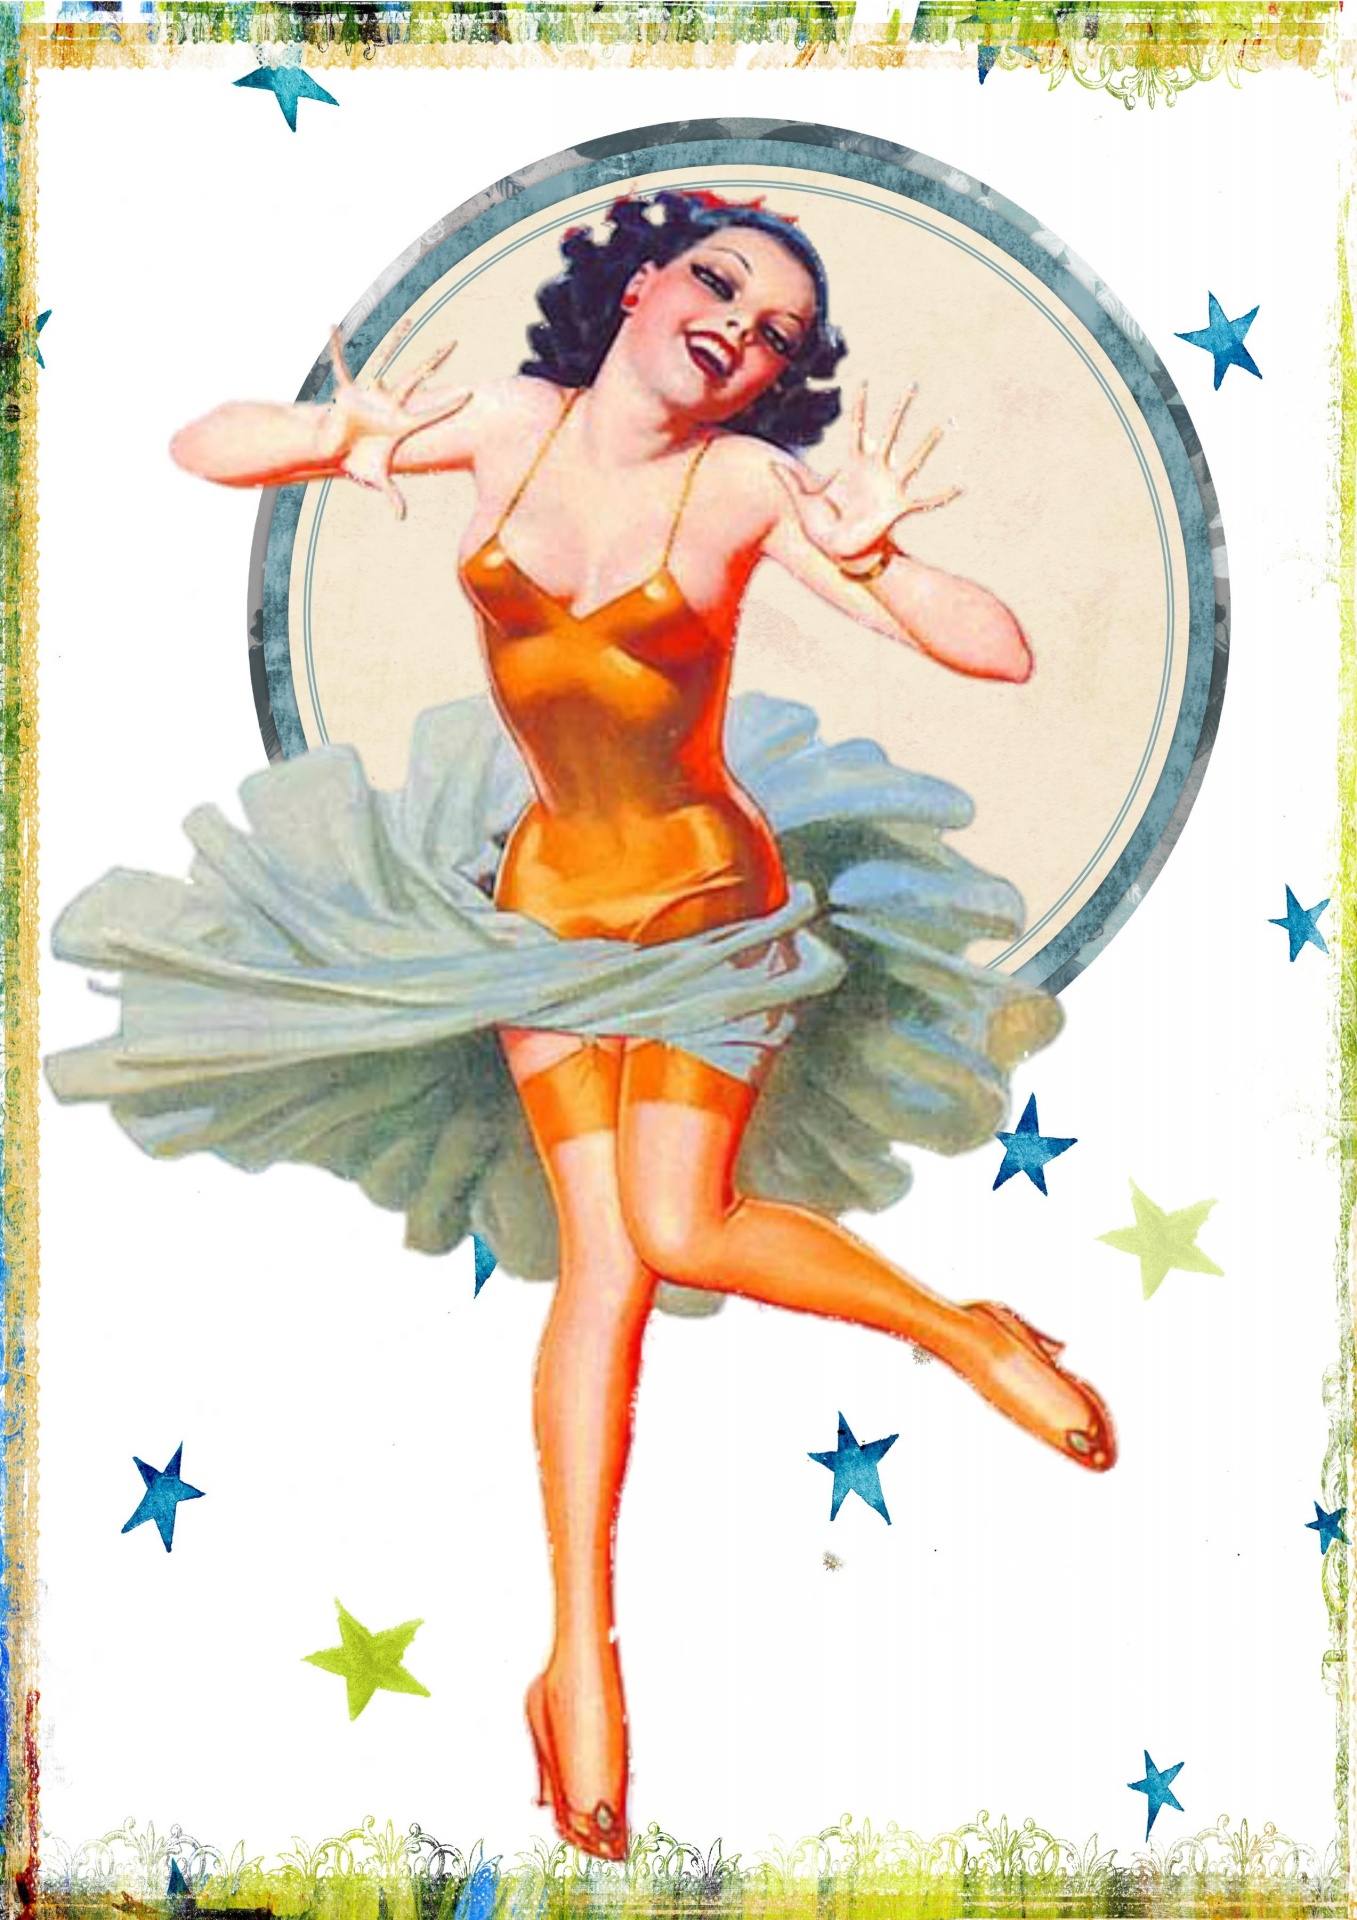 Retro Pin-up Lady Art Collage Free Stock Photo - Public Domain Pictures